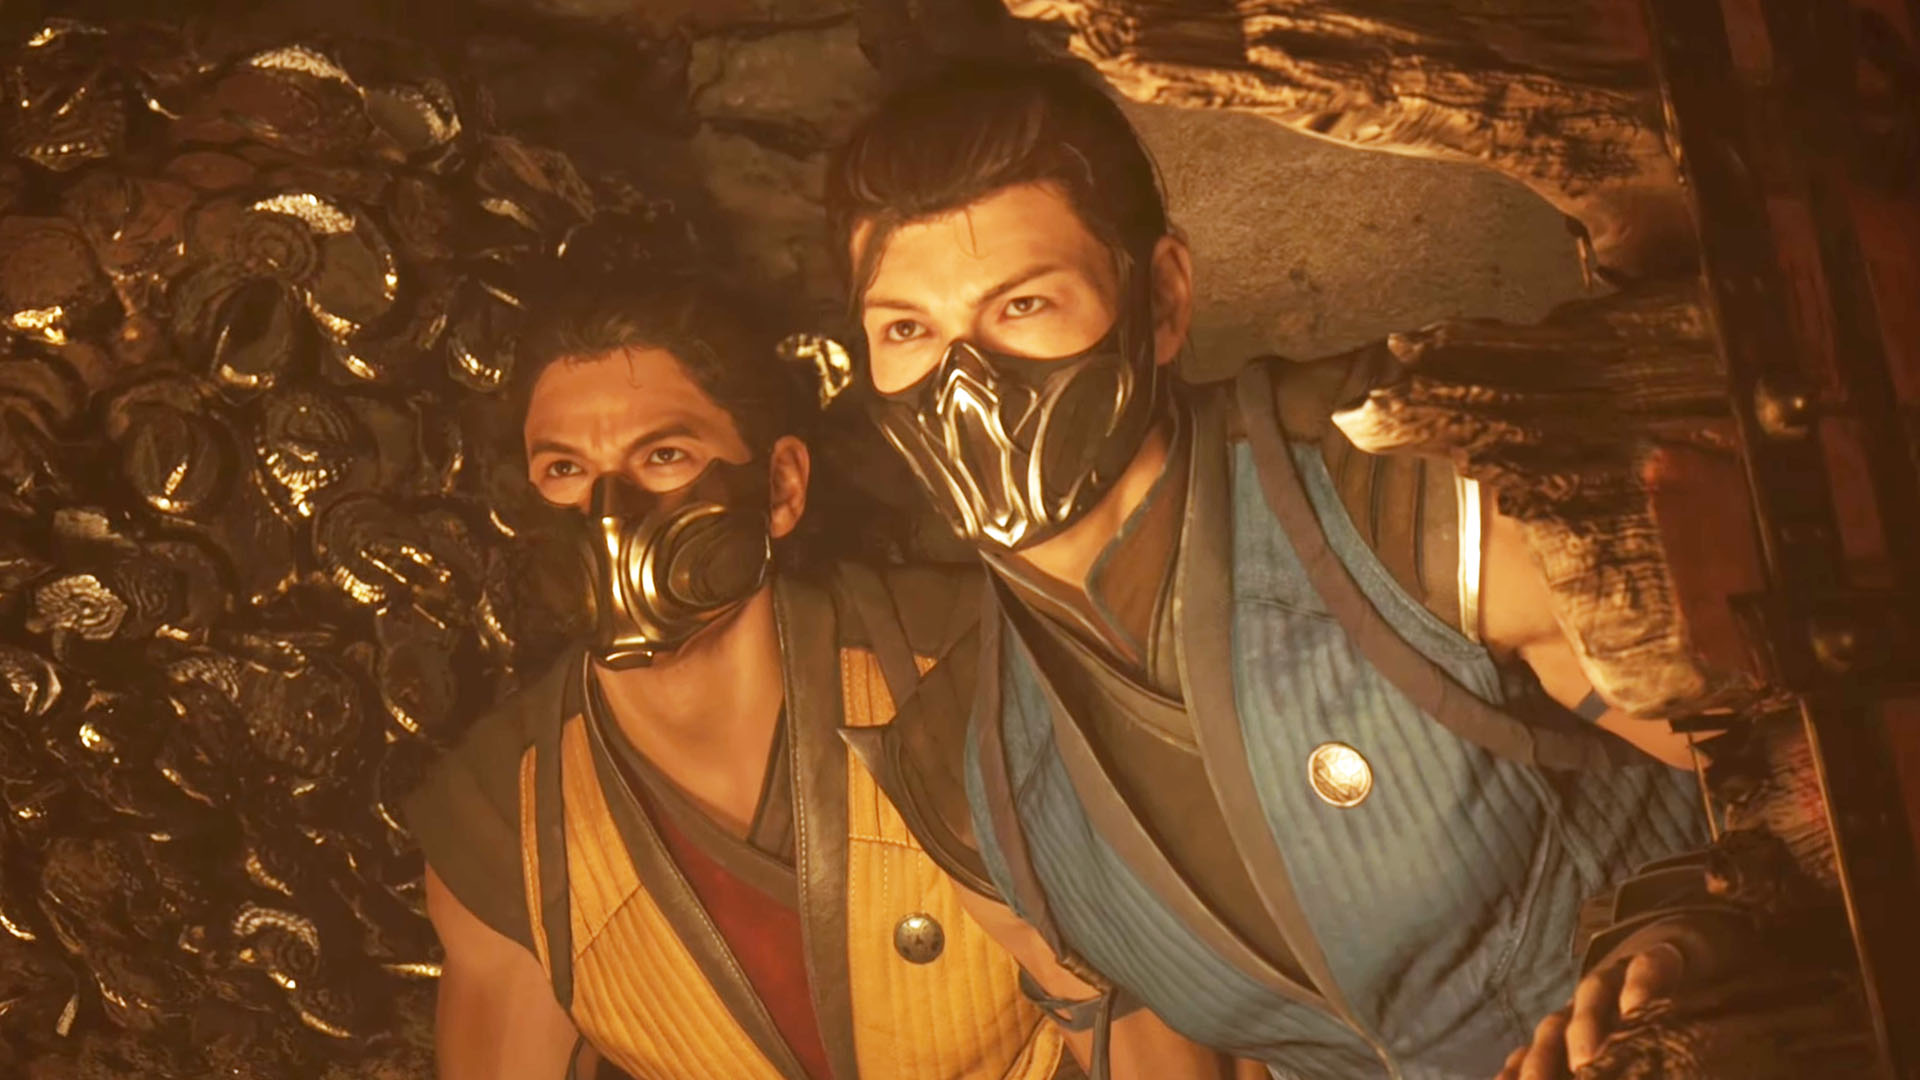 Mortal Kombat 11 Kombat League Season 2 Begins, Here Are the Rewards and  Challenges for Competing